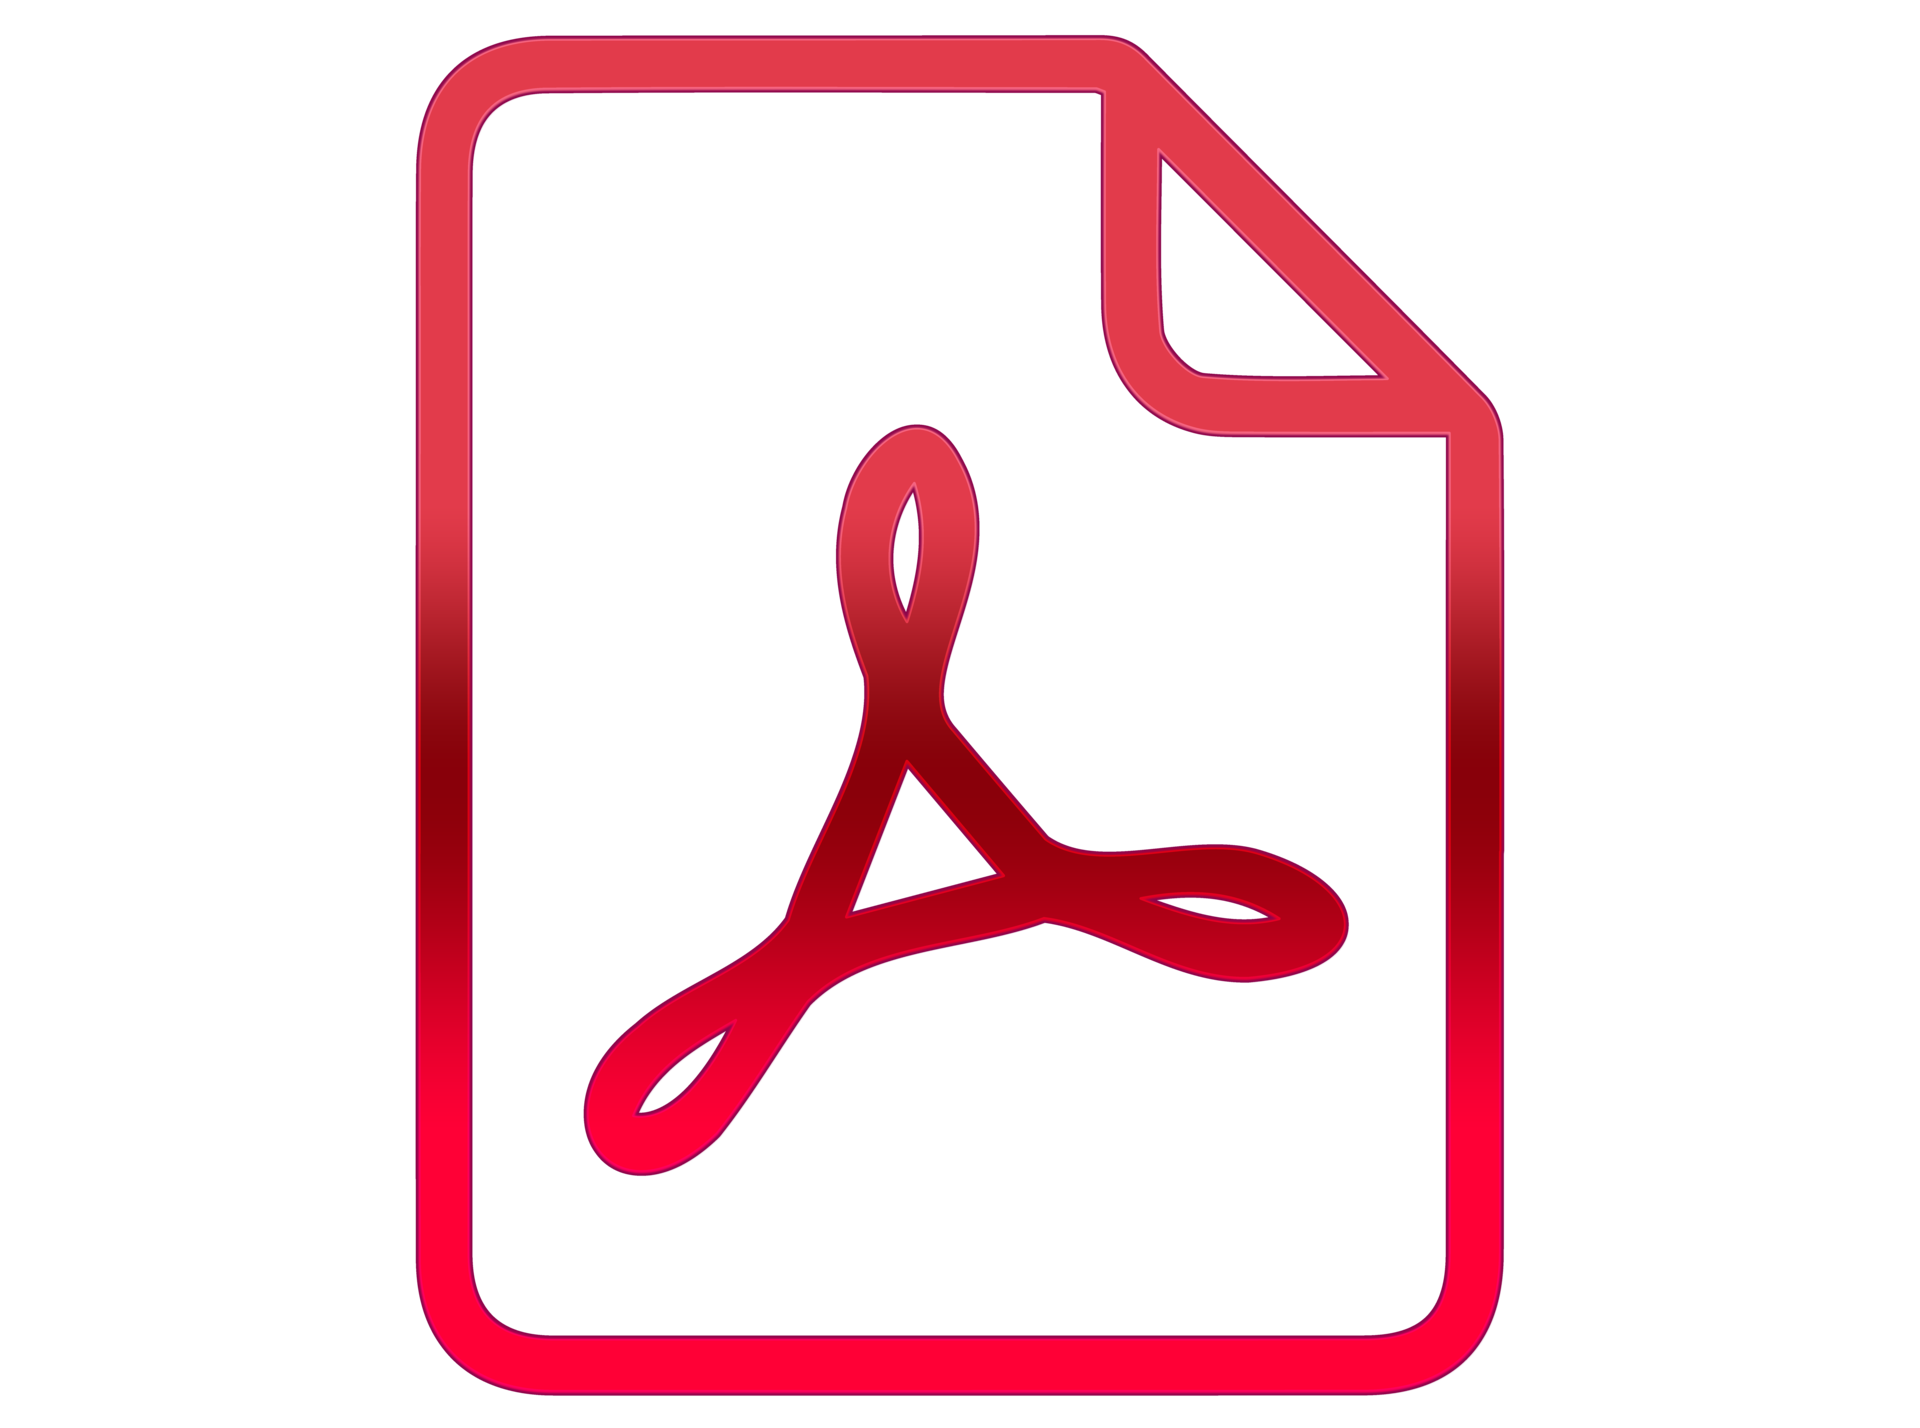 pdf-icon-on-transparent-background-free-png.webp